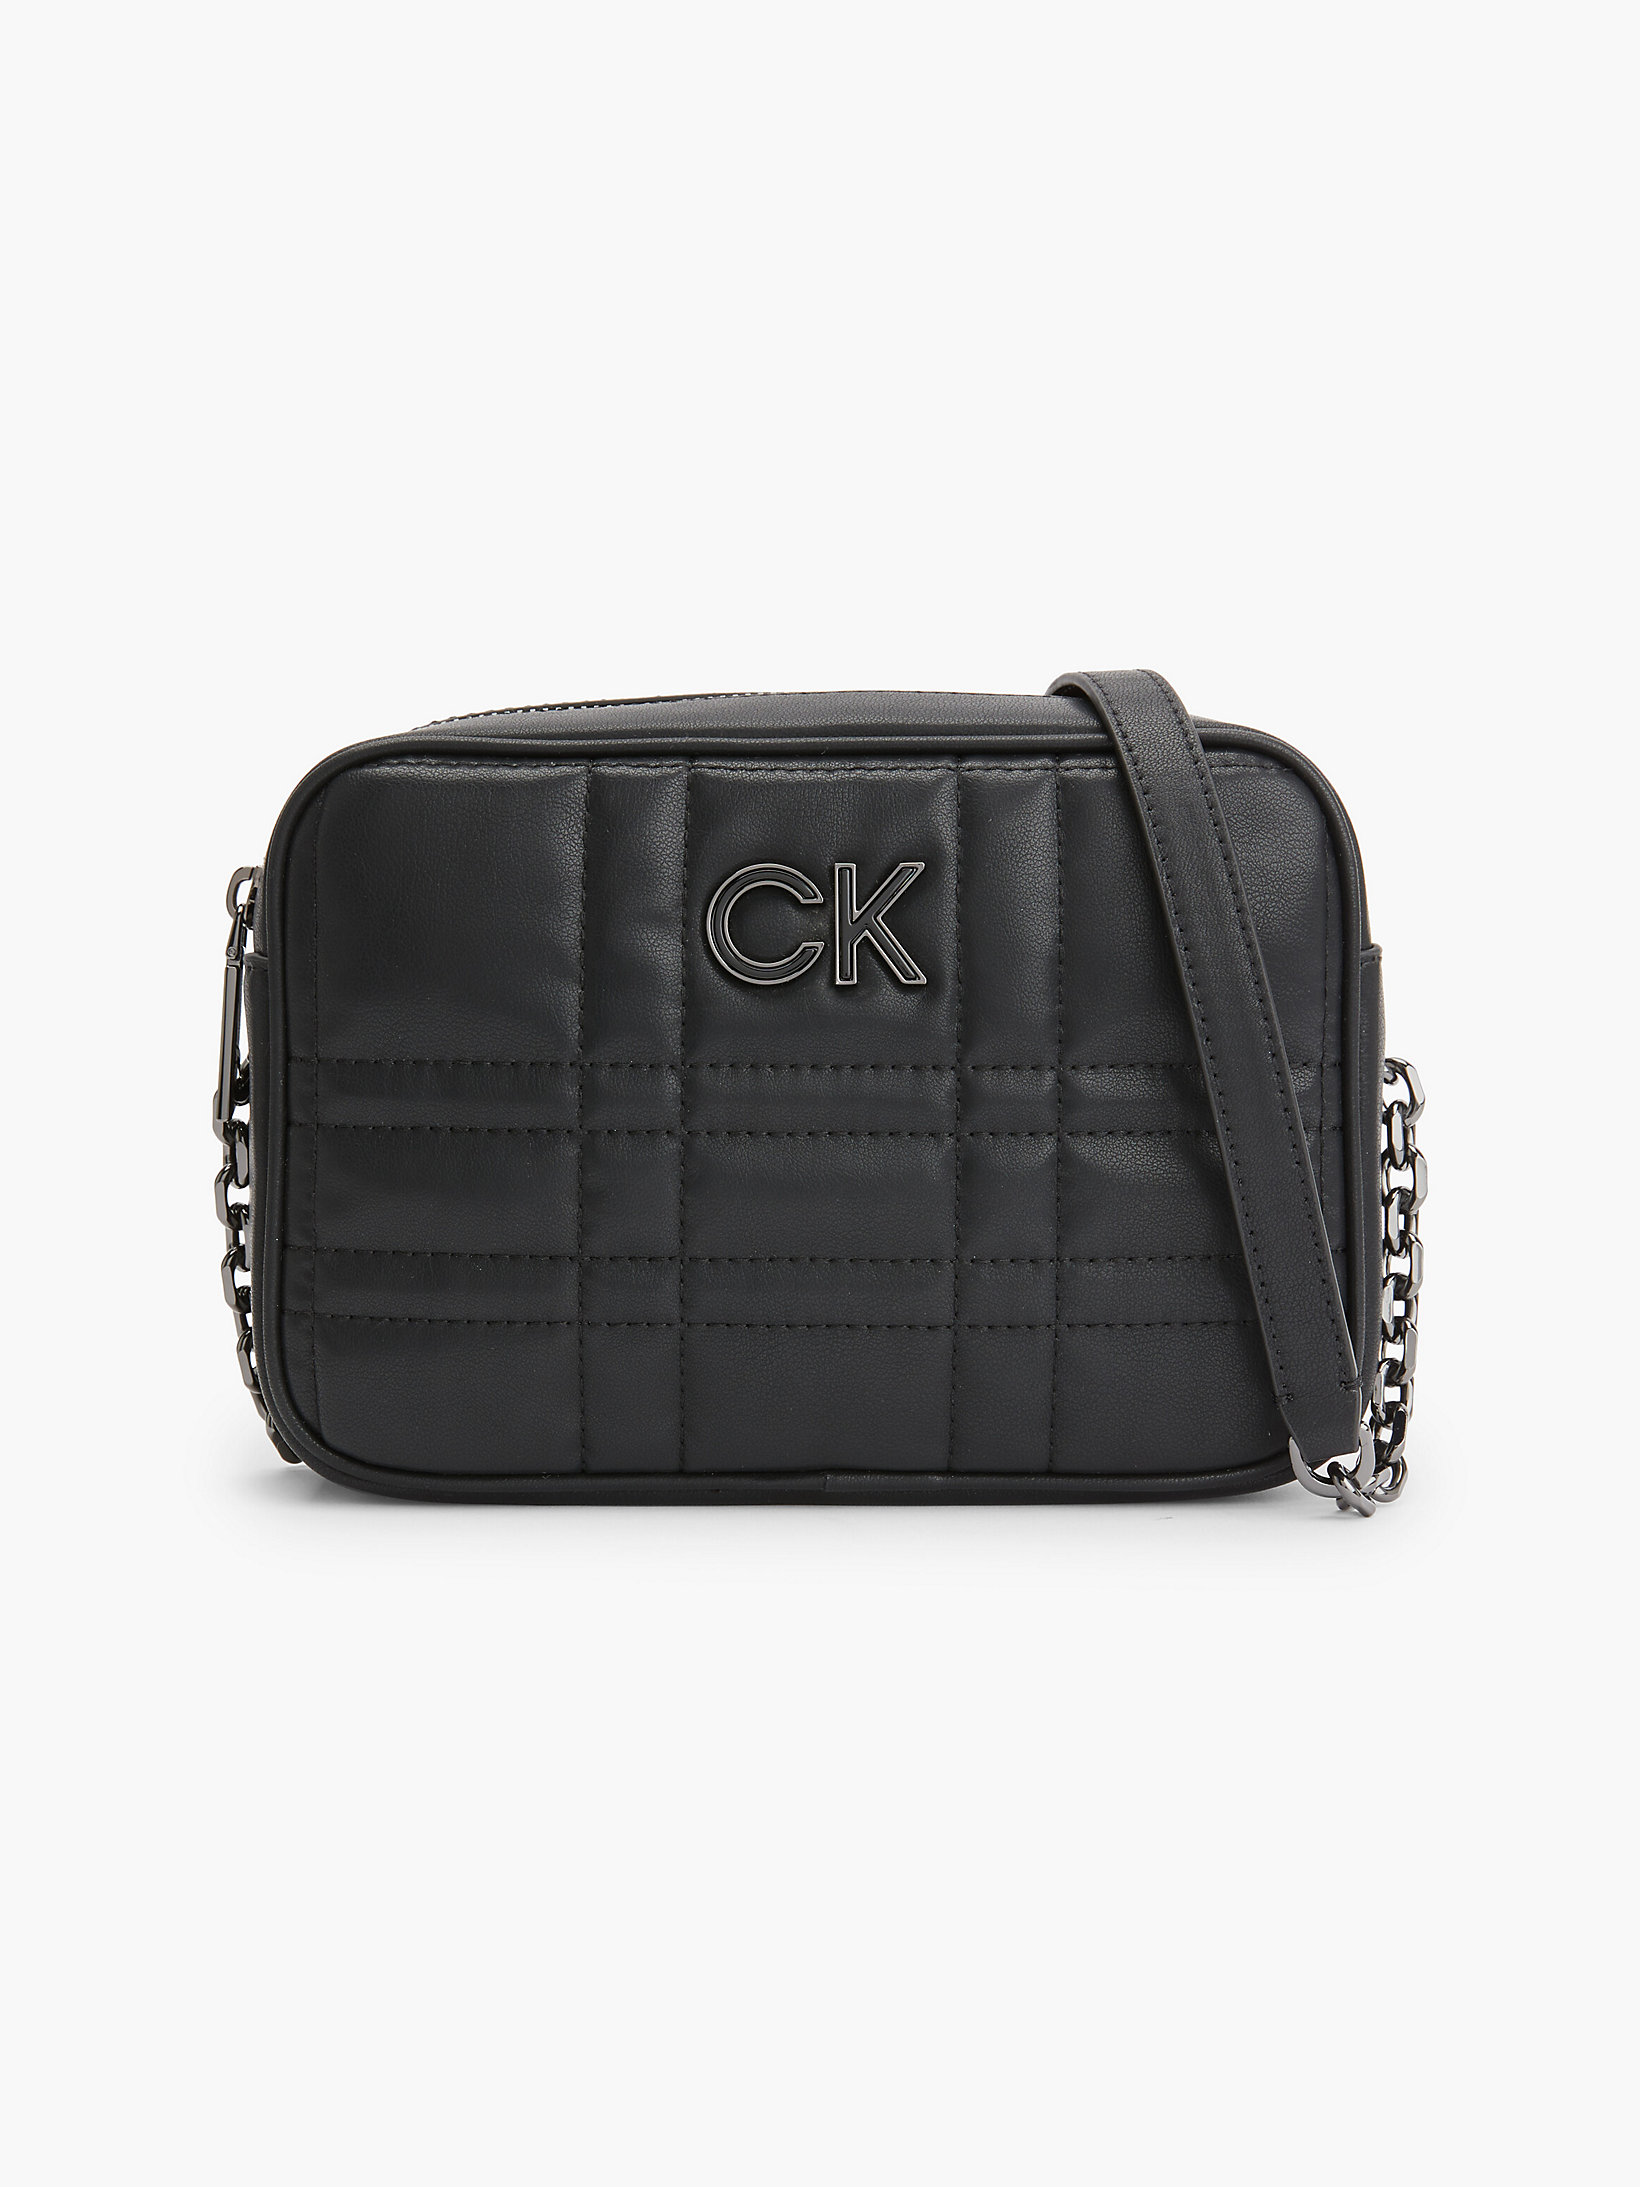 CK Black Recycled Quilted Crossbody Bag undefined women Calvin Klein